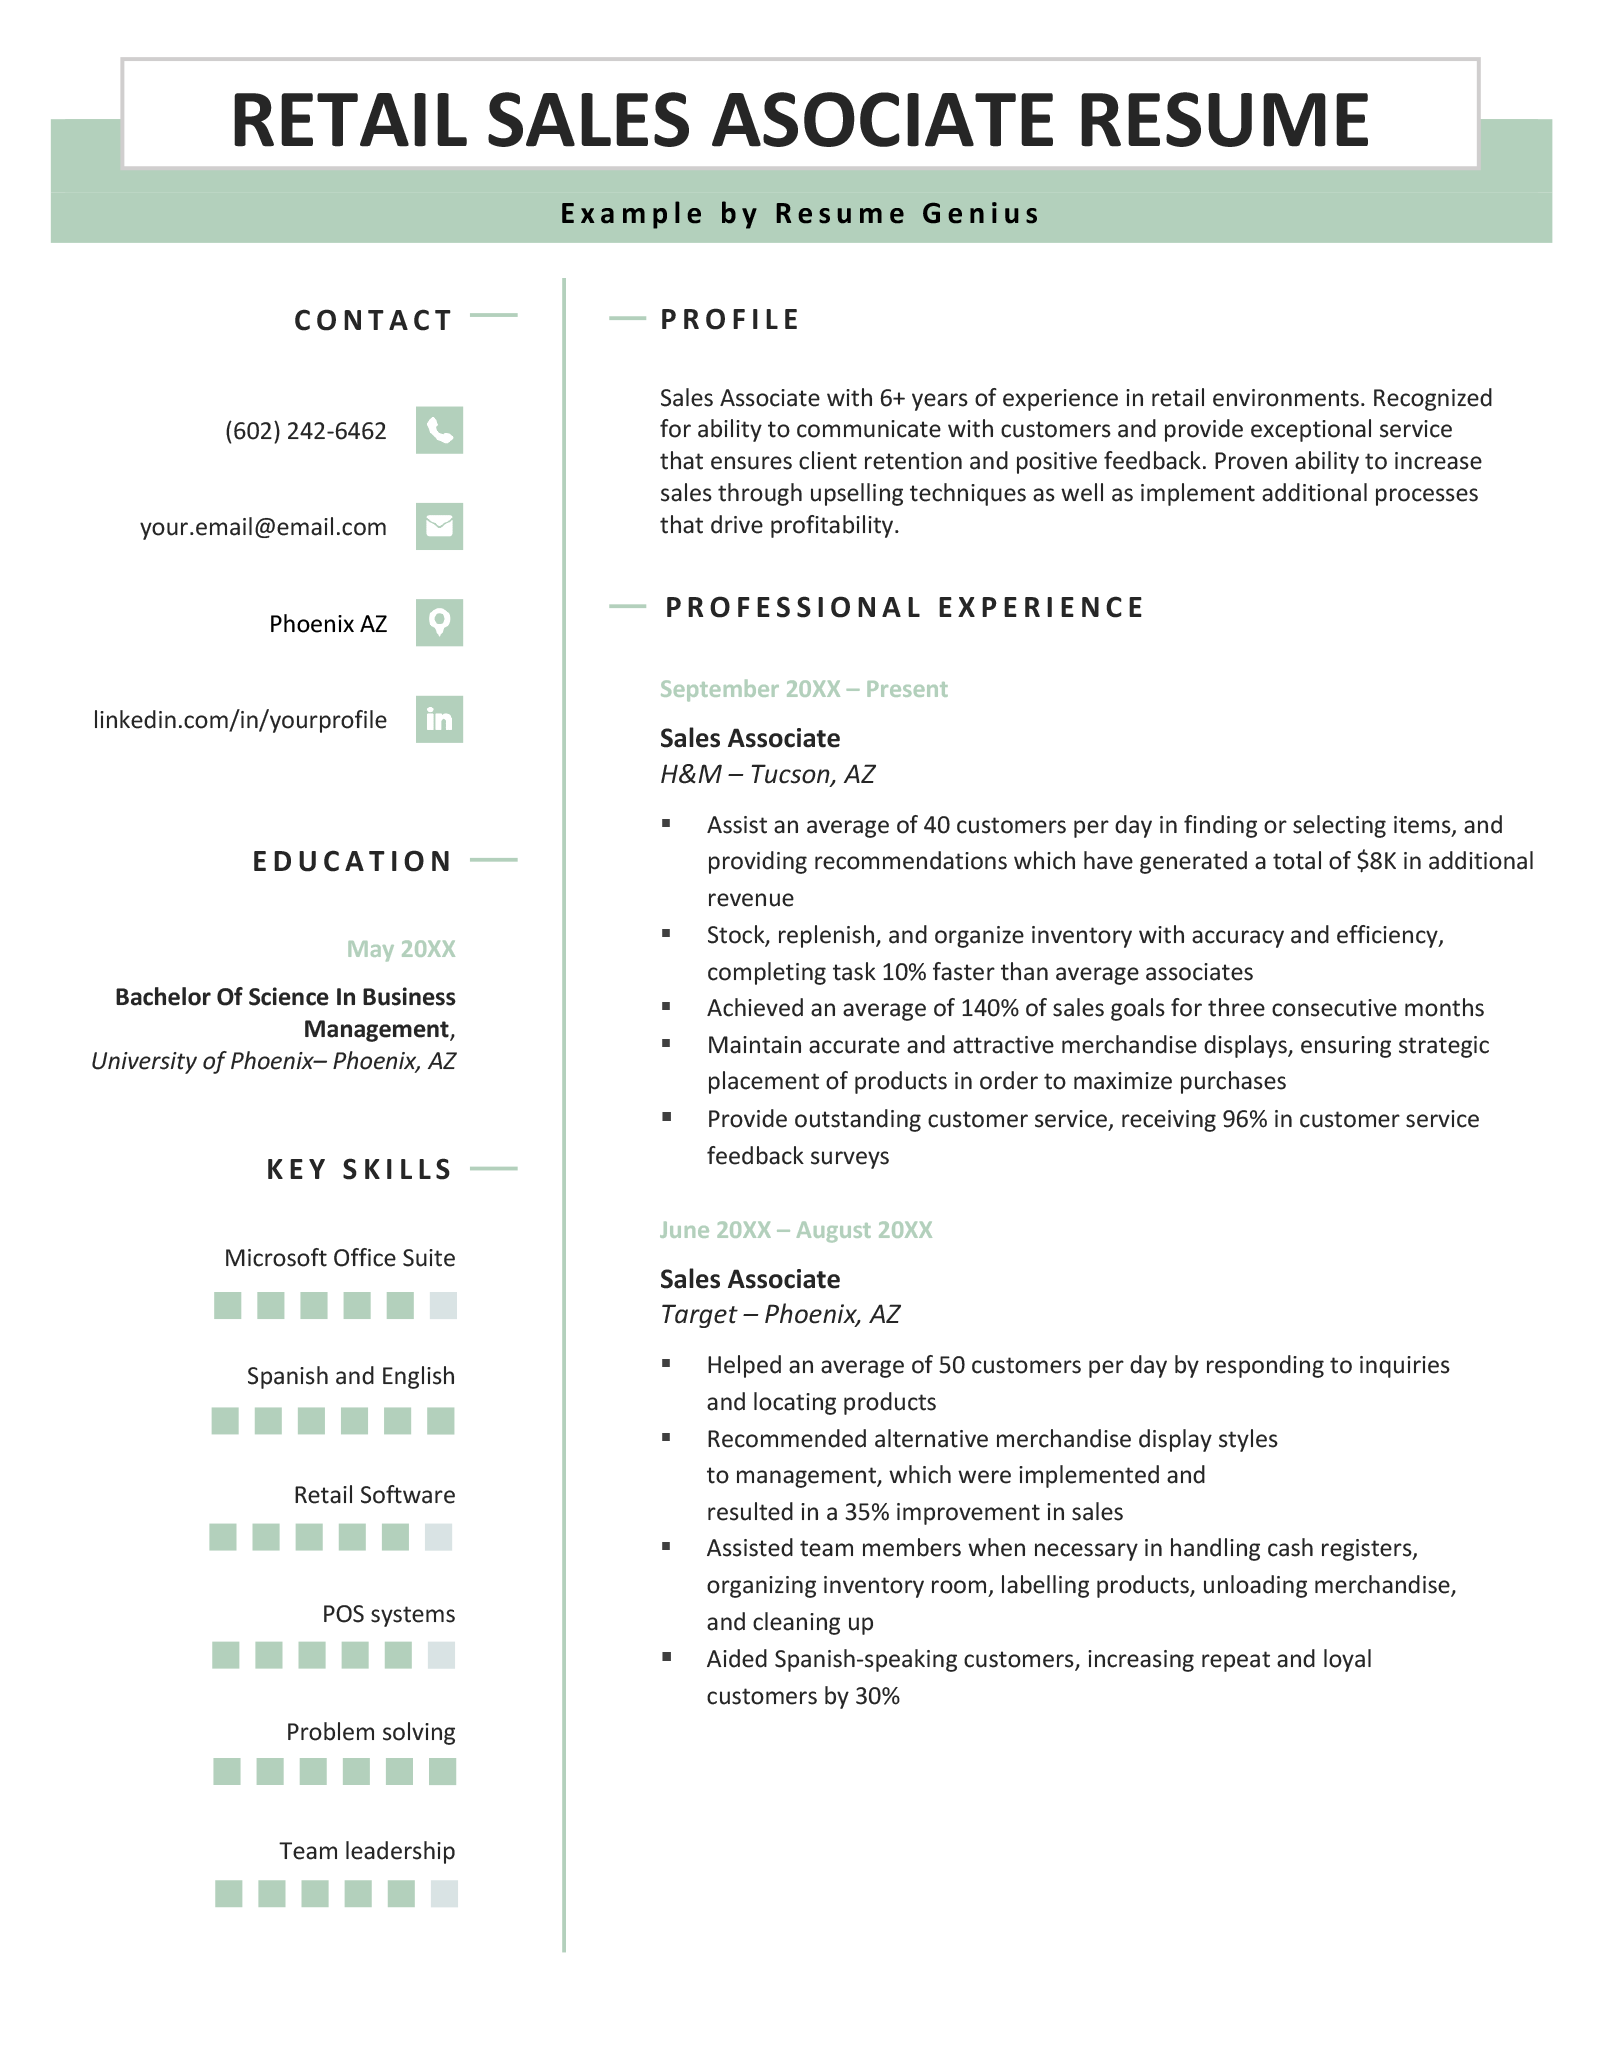 Example of a retail sales associate resume that uses the chronological resume format, with two columns and light green design features.